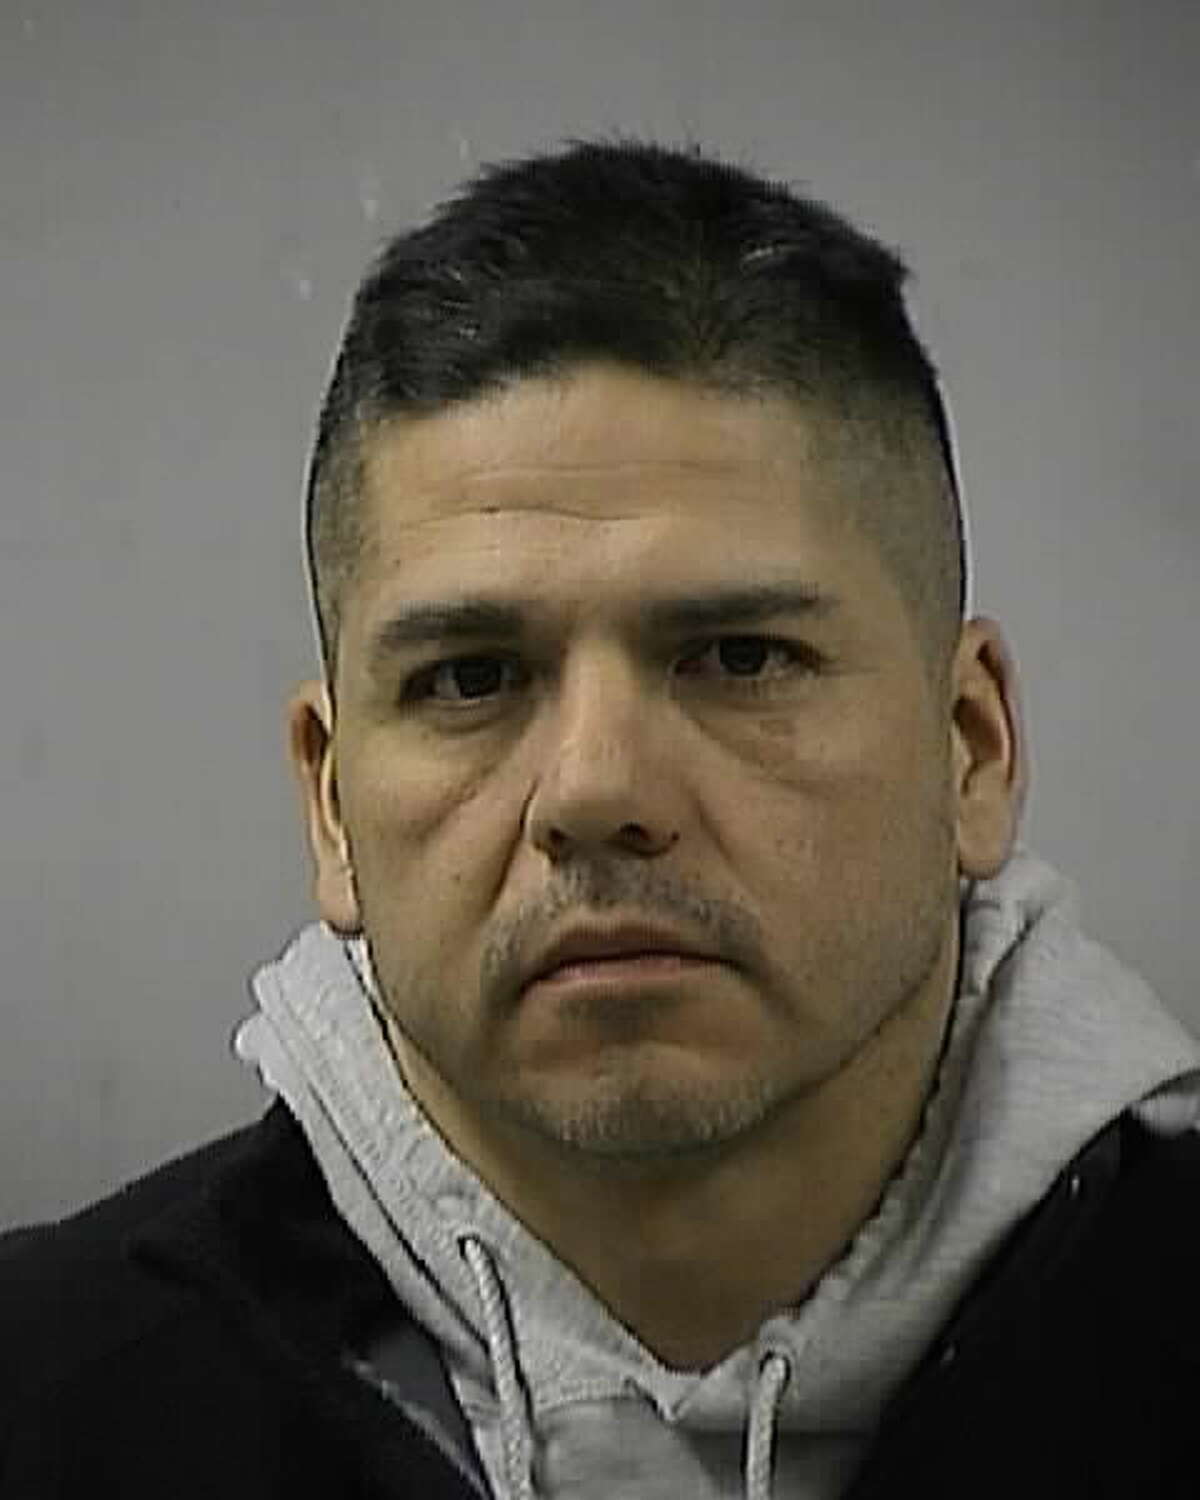 San Antonio police officer Roland Alvarado, 43, is accused of driving while intoxicated early Friday, when he crashed into a parked vehicle on the Northeast Side.